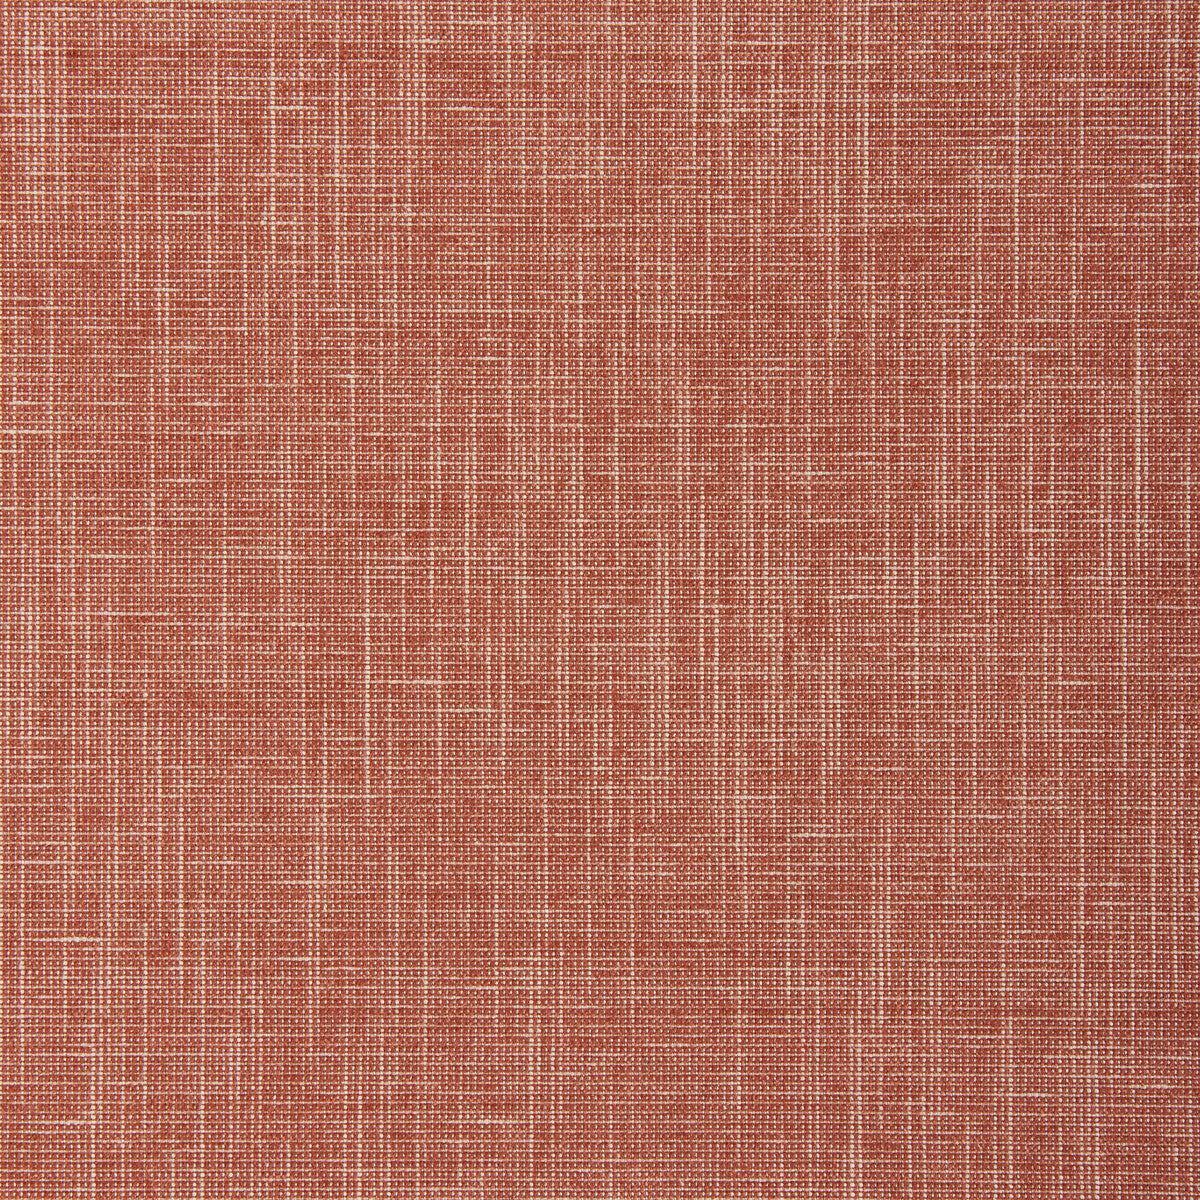 Kravet Smart fabric in 37078-119 color - pattern 37078.119.0 - by Kravet Smart in the Trio Textures collection